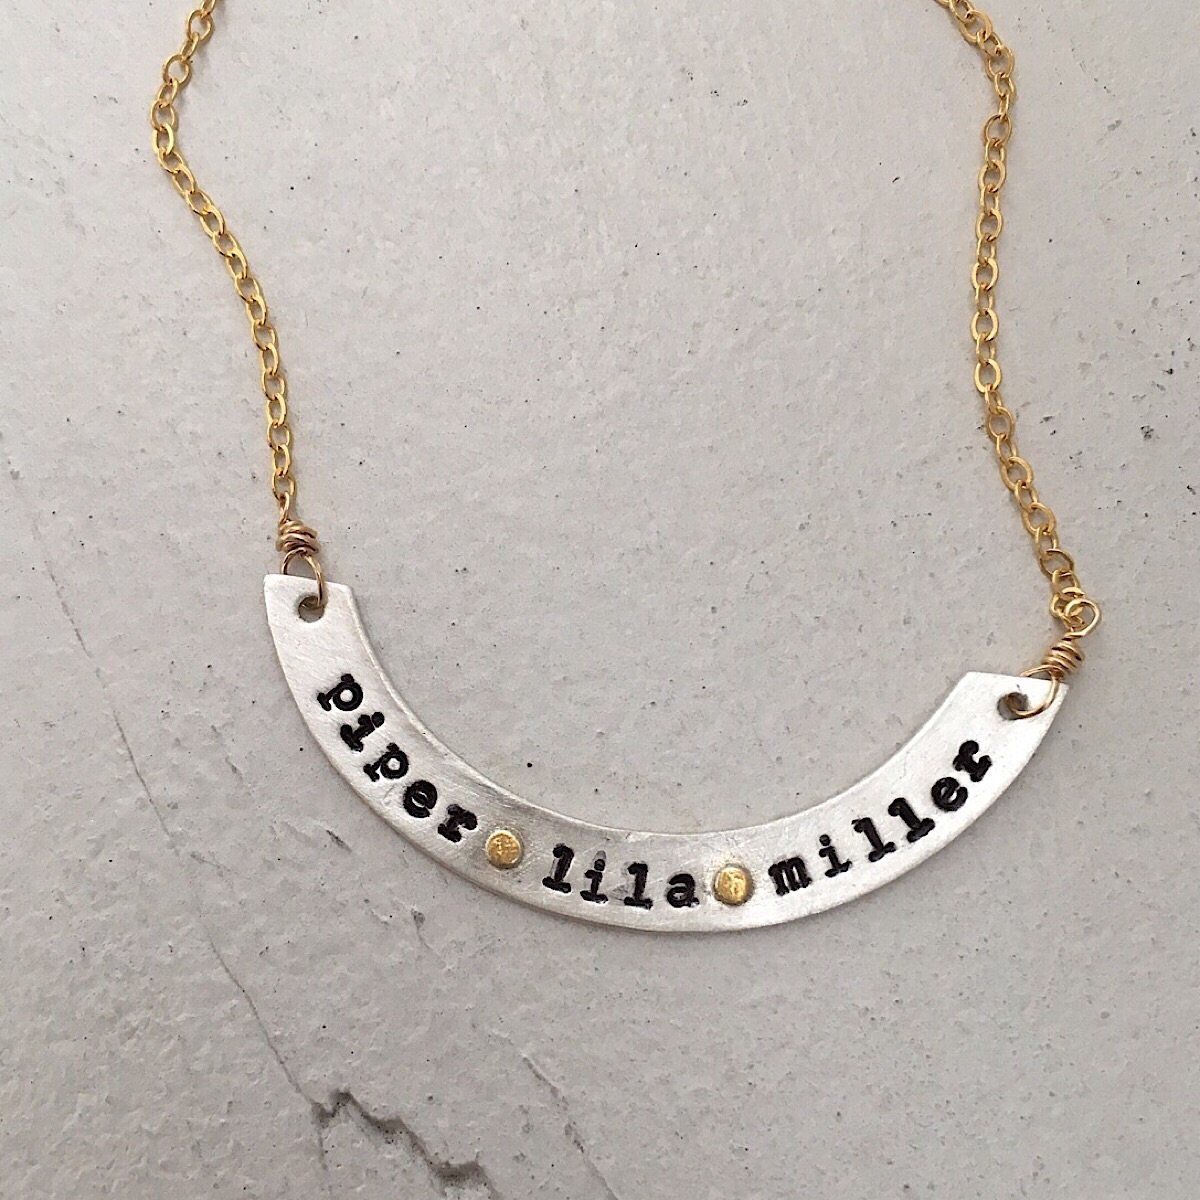 Curved Bar Necklace - IsabelleGraceJewelry